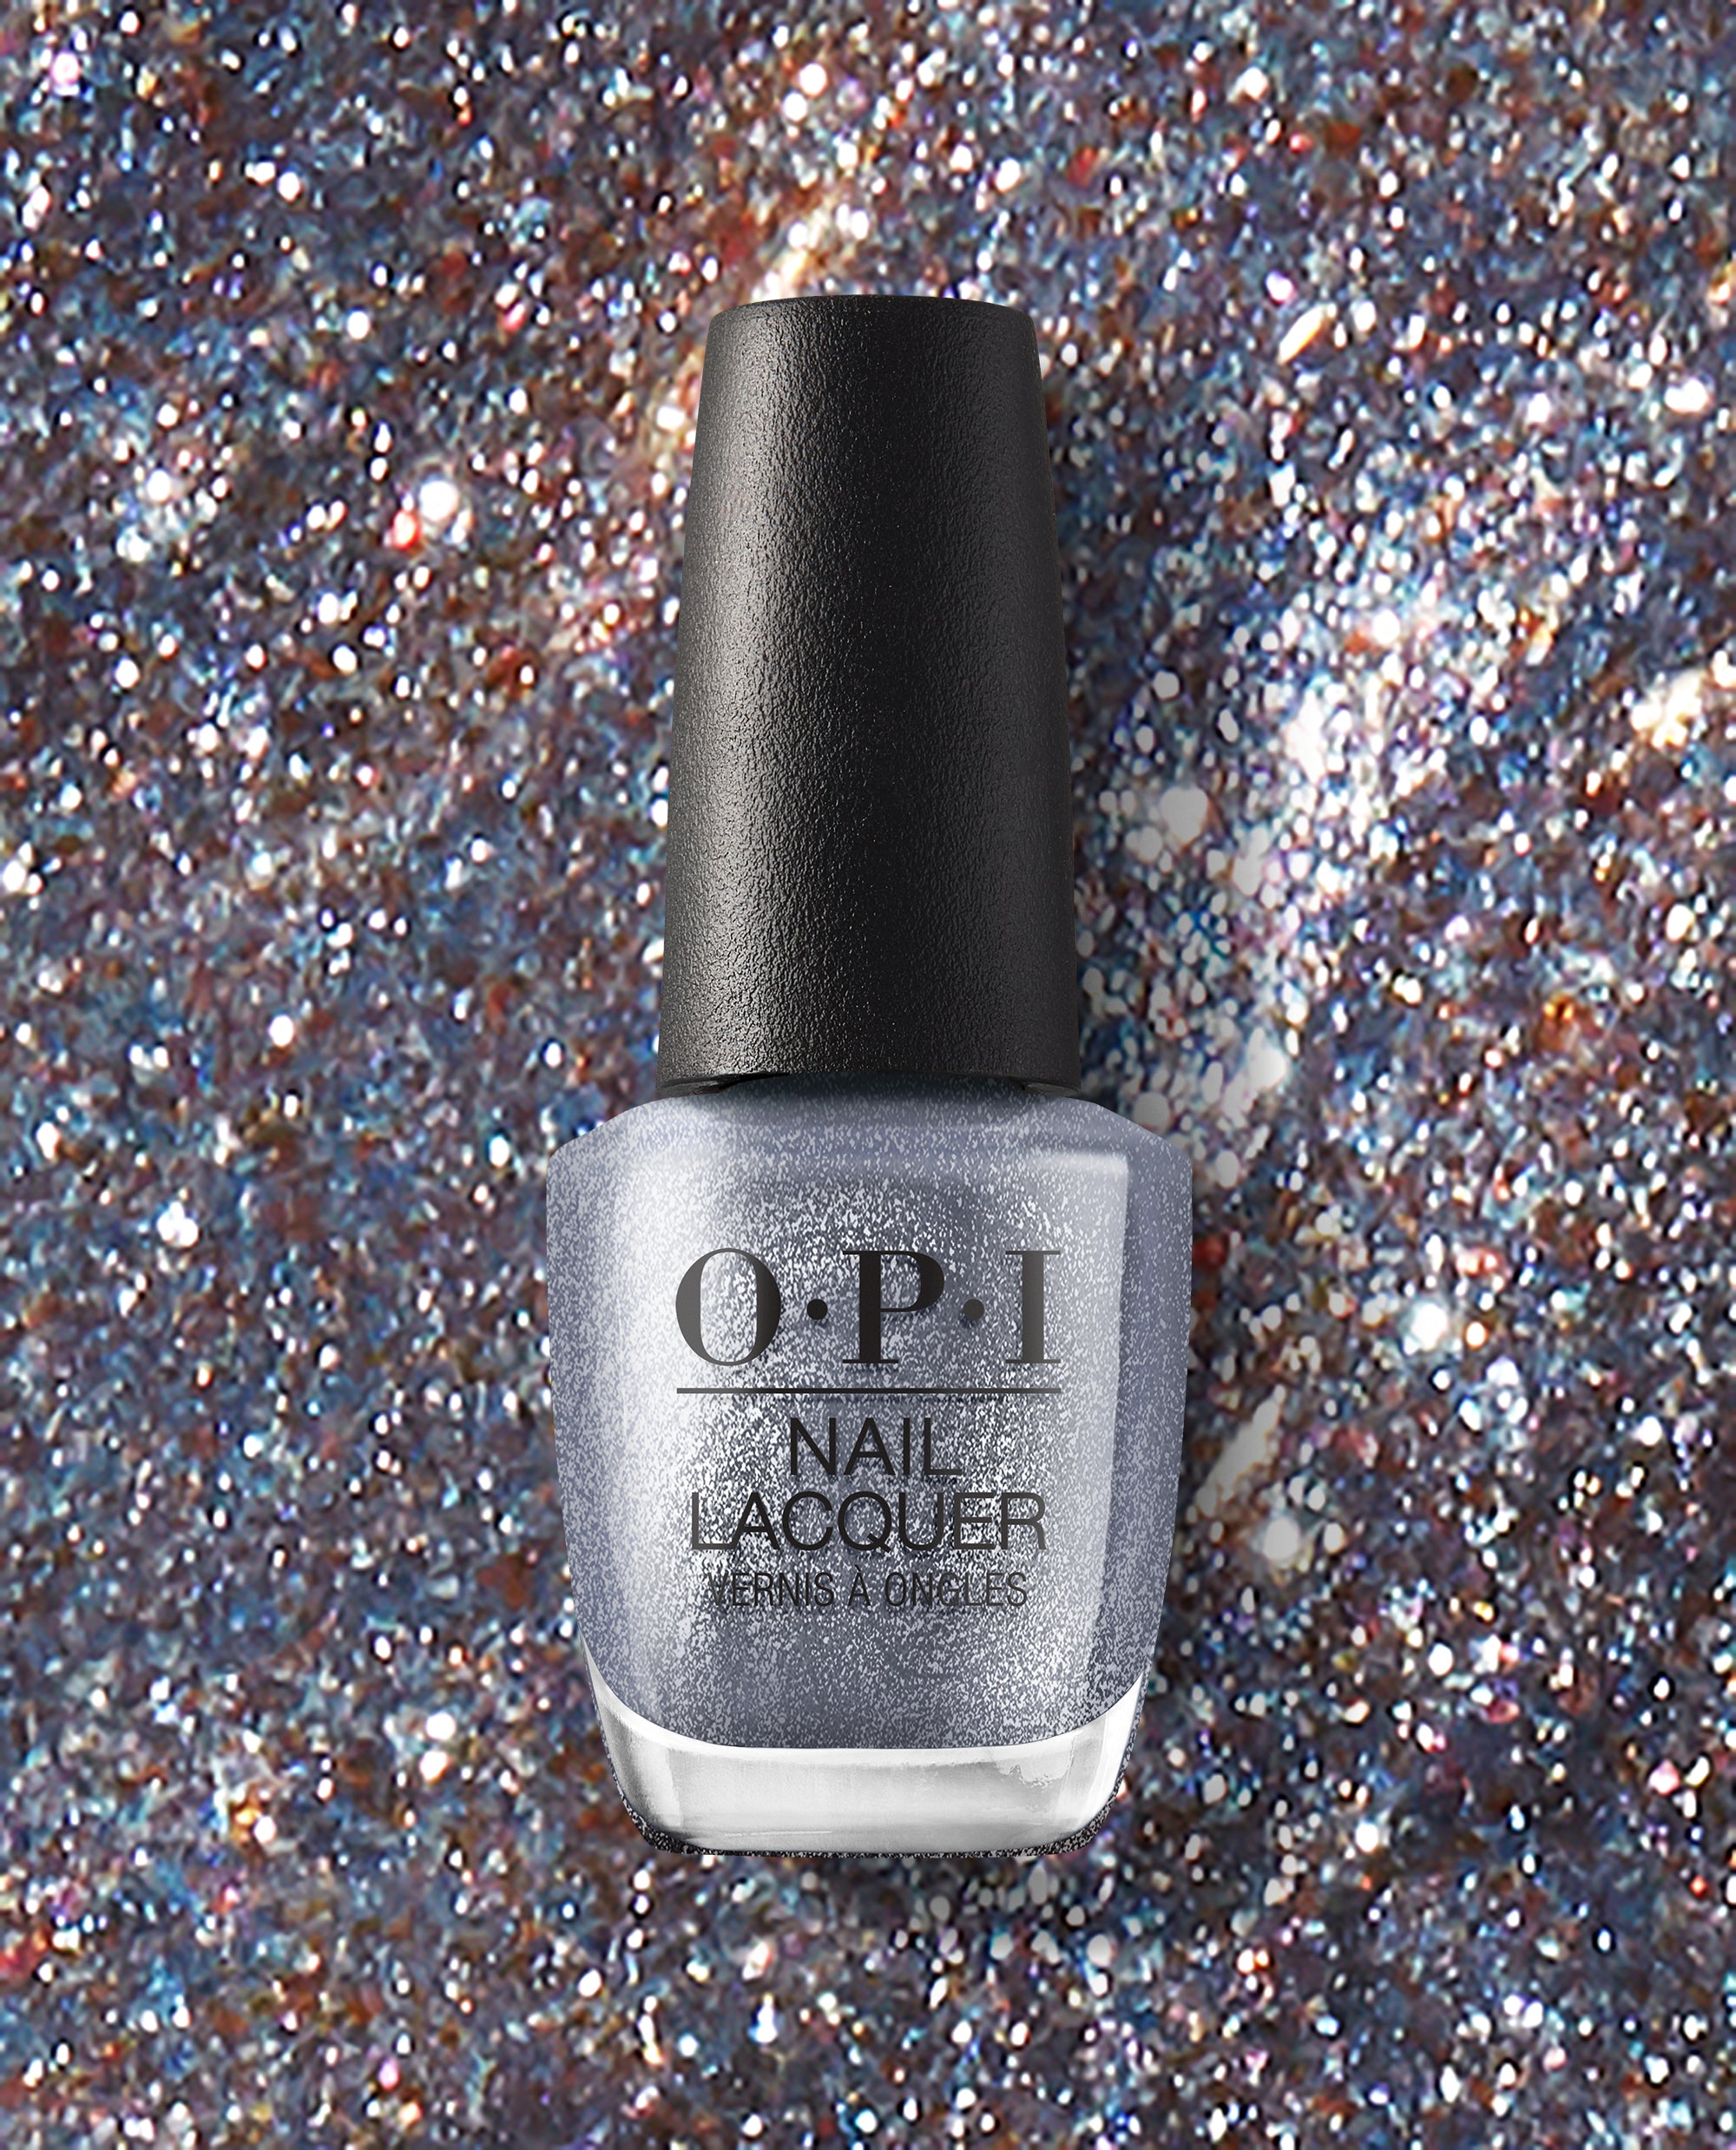 OPI - ATTENTION! #HolidayInspiration from our High Definition Glitters  collection! #TwilightTones is a gunmetal shade that will let your clients'  nails take center stage with intense shine. https://bit.ly/3p3OVi2  #ColorIsTheAnswer #OPIObsessed #OPIPro ...